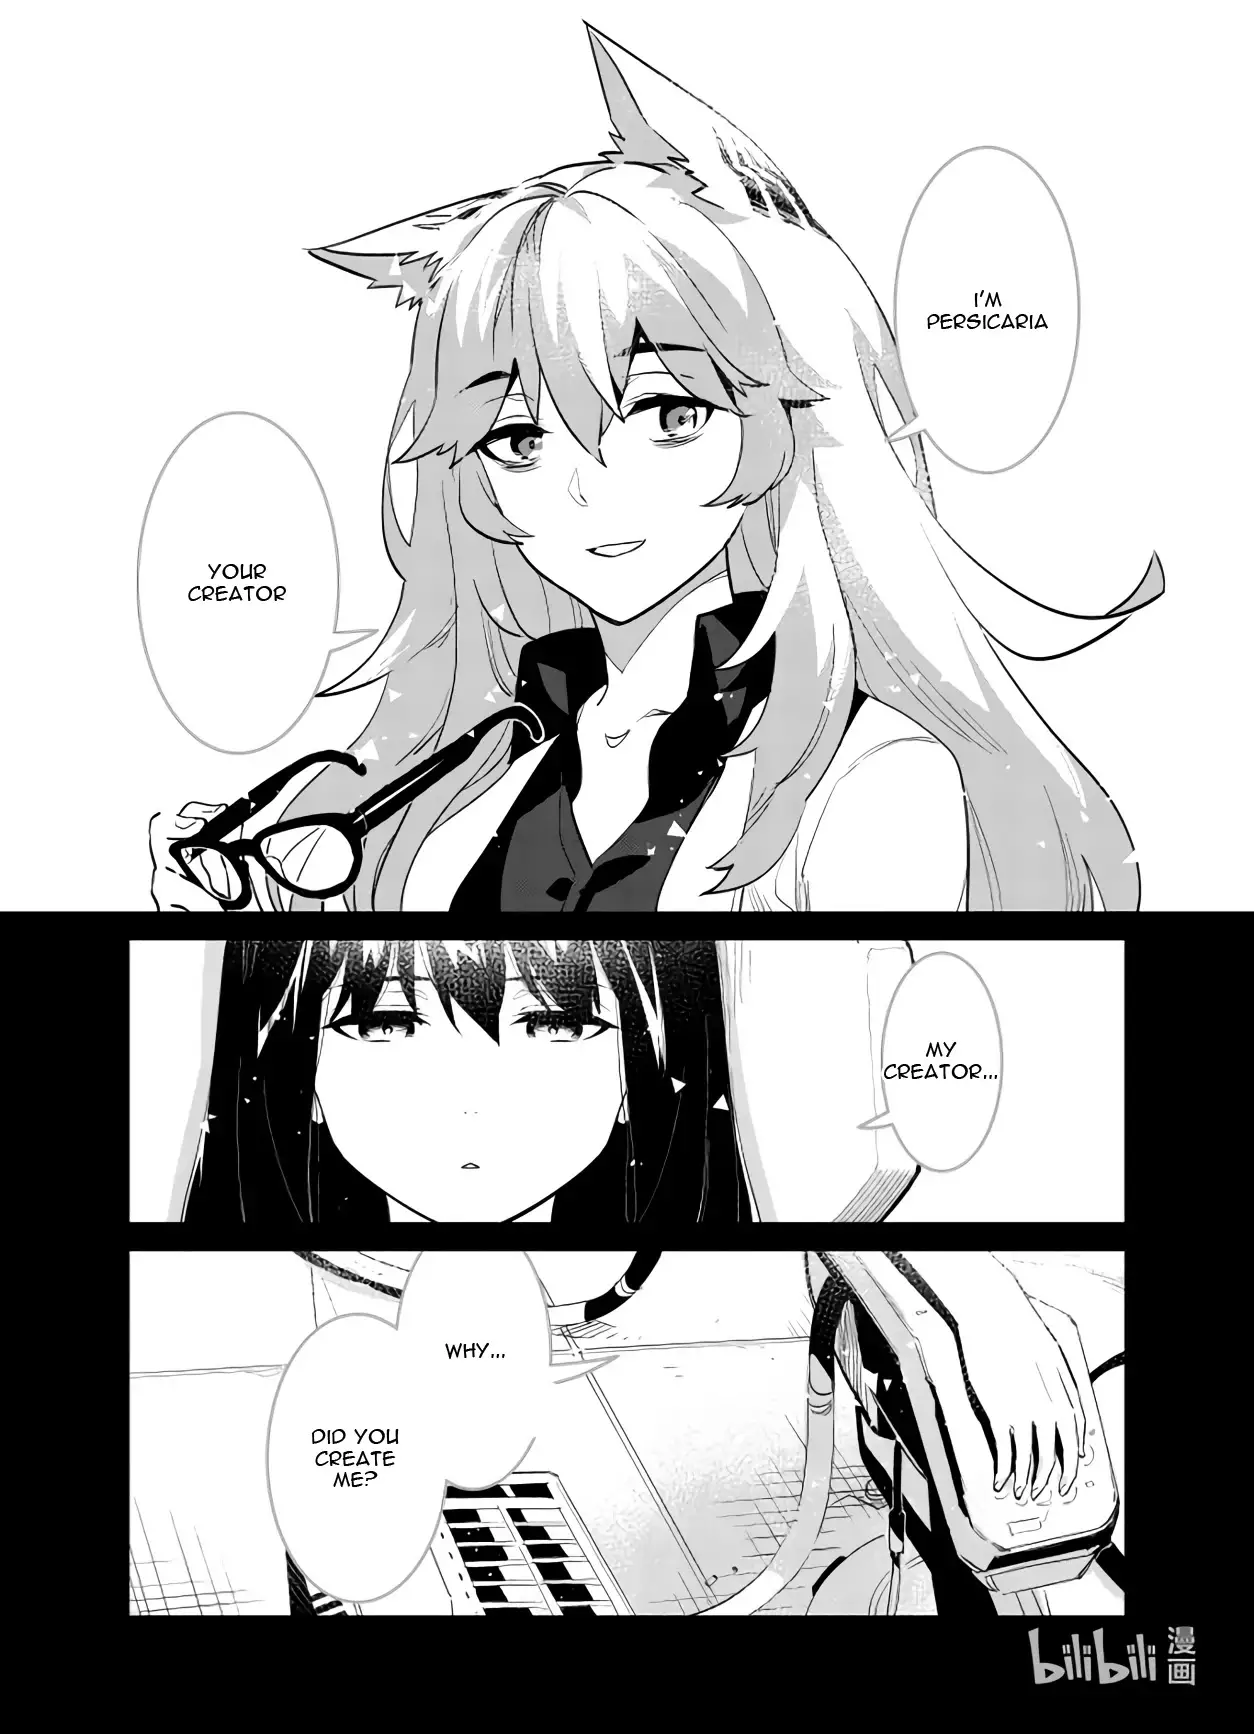 Girls' Frontline - 29 page 14-14a4692a